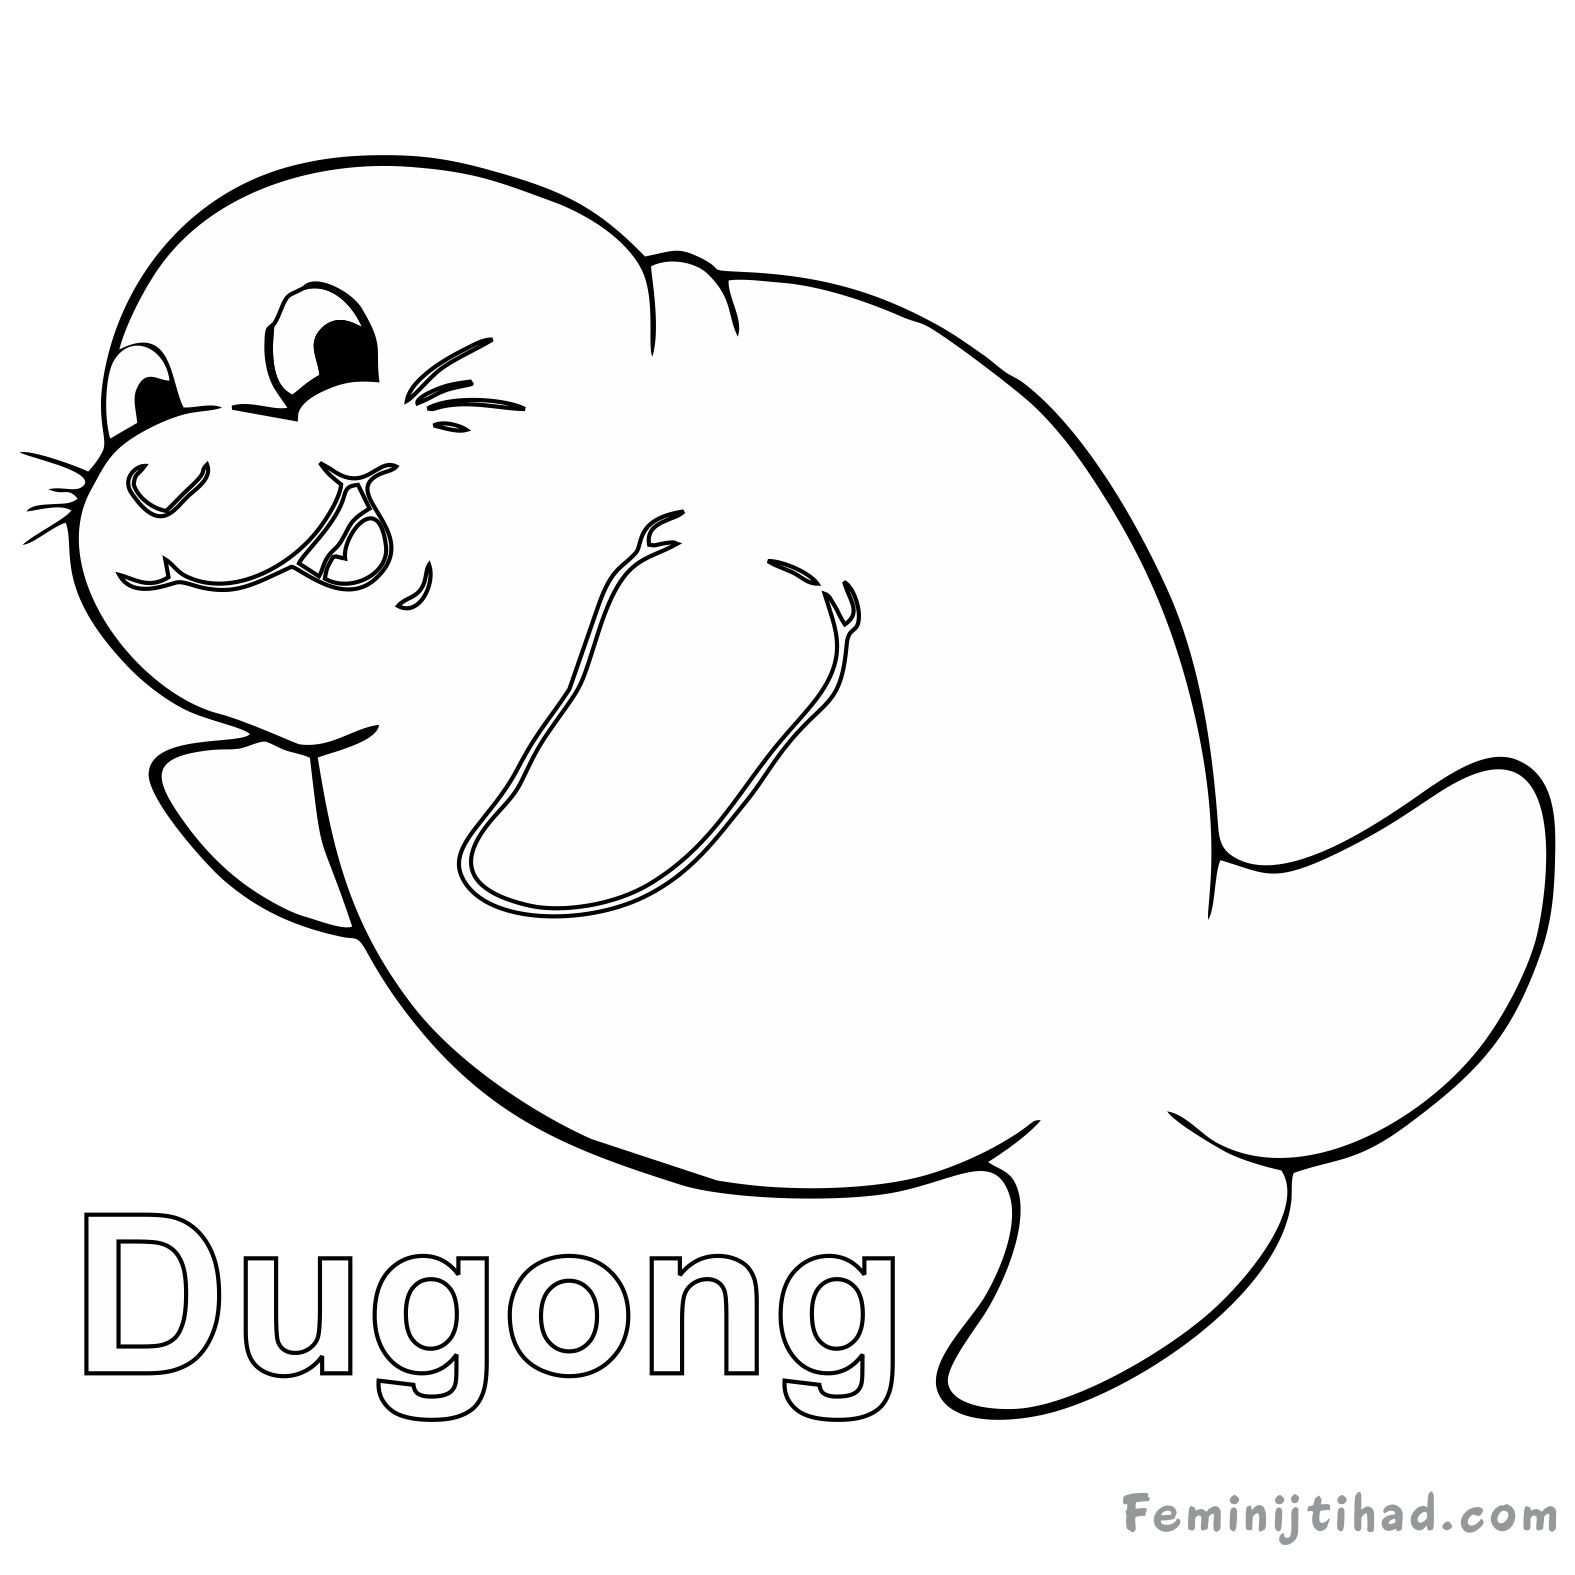 easy dugong coloring page